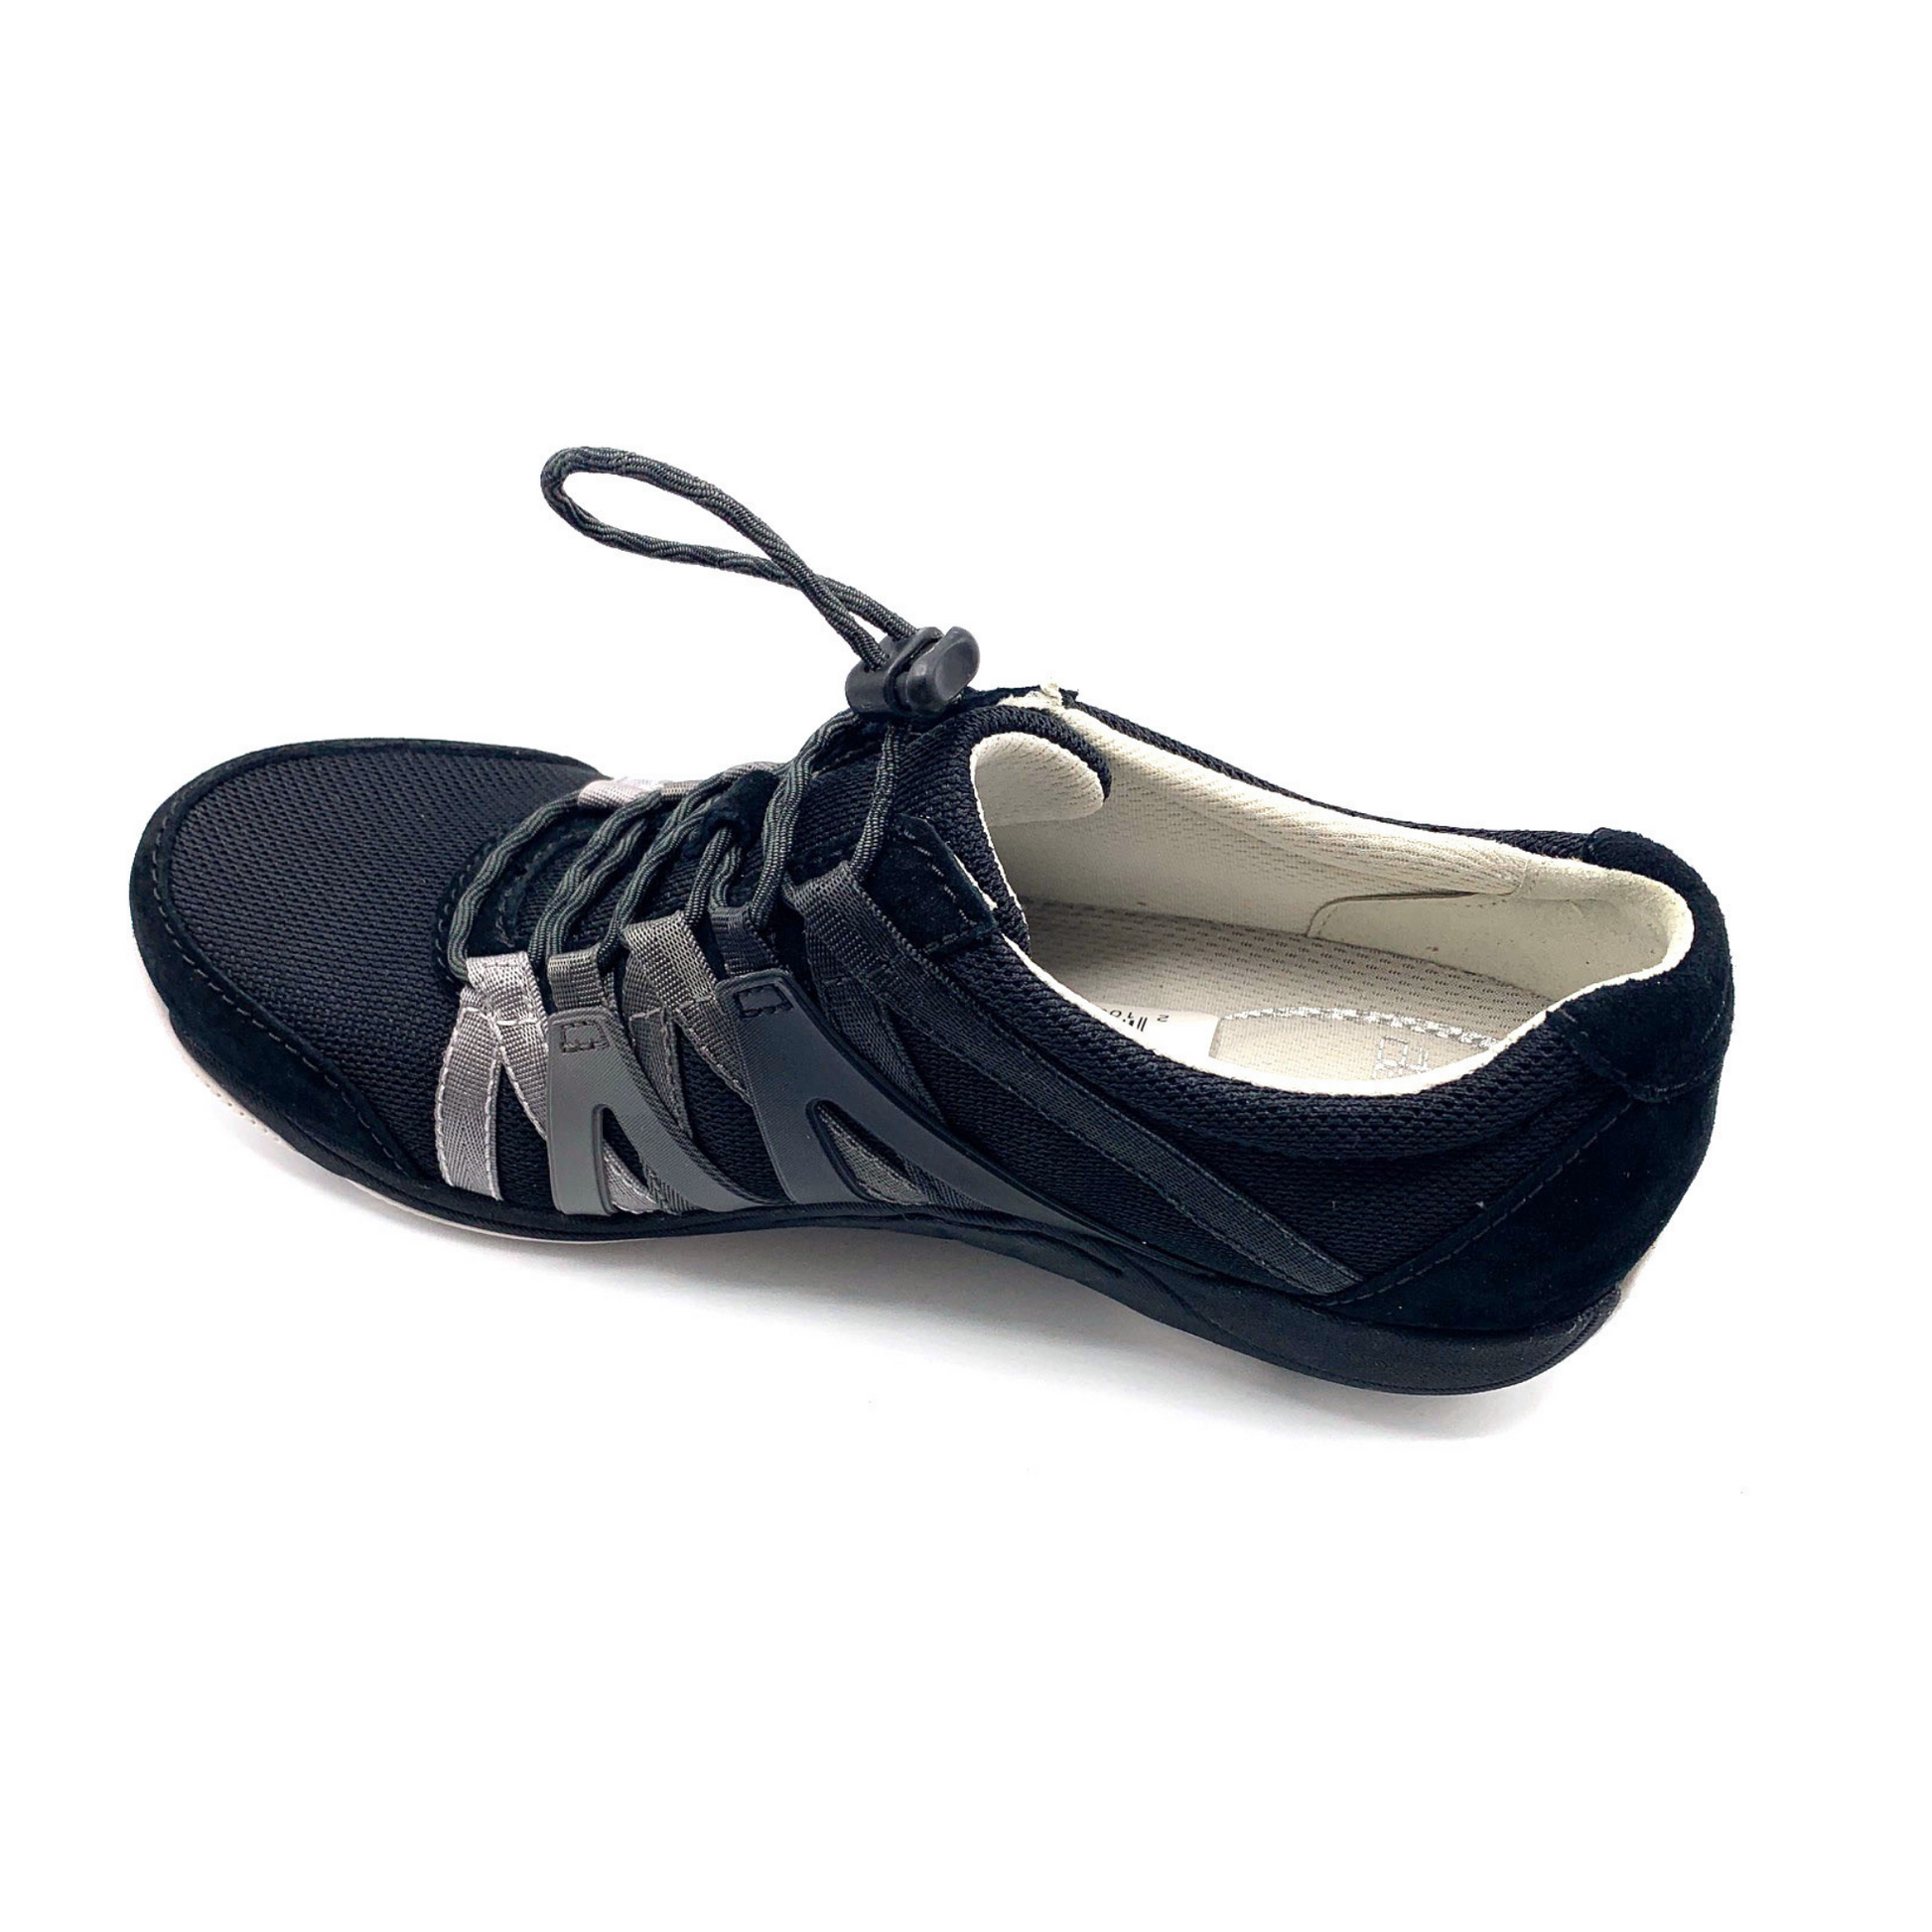 A black sneaker viewed from a left-top angle. The shoe has black cord-like laces, a mesh top, suede detailing, and an Ombre zig-zagged side pattern.